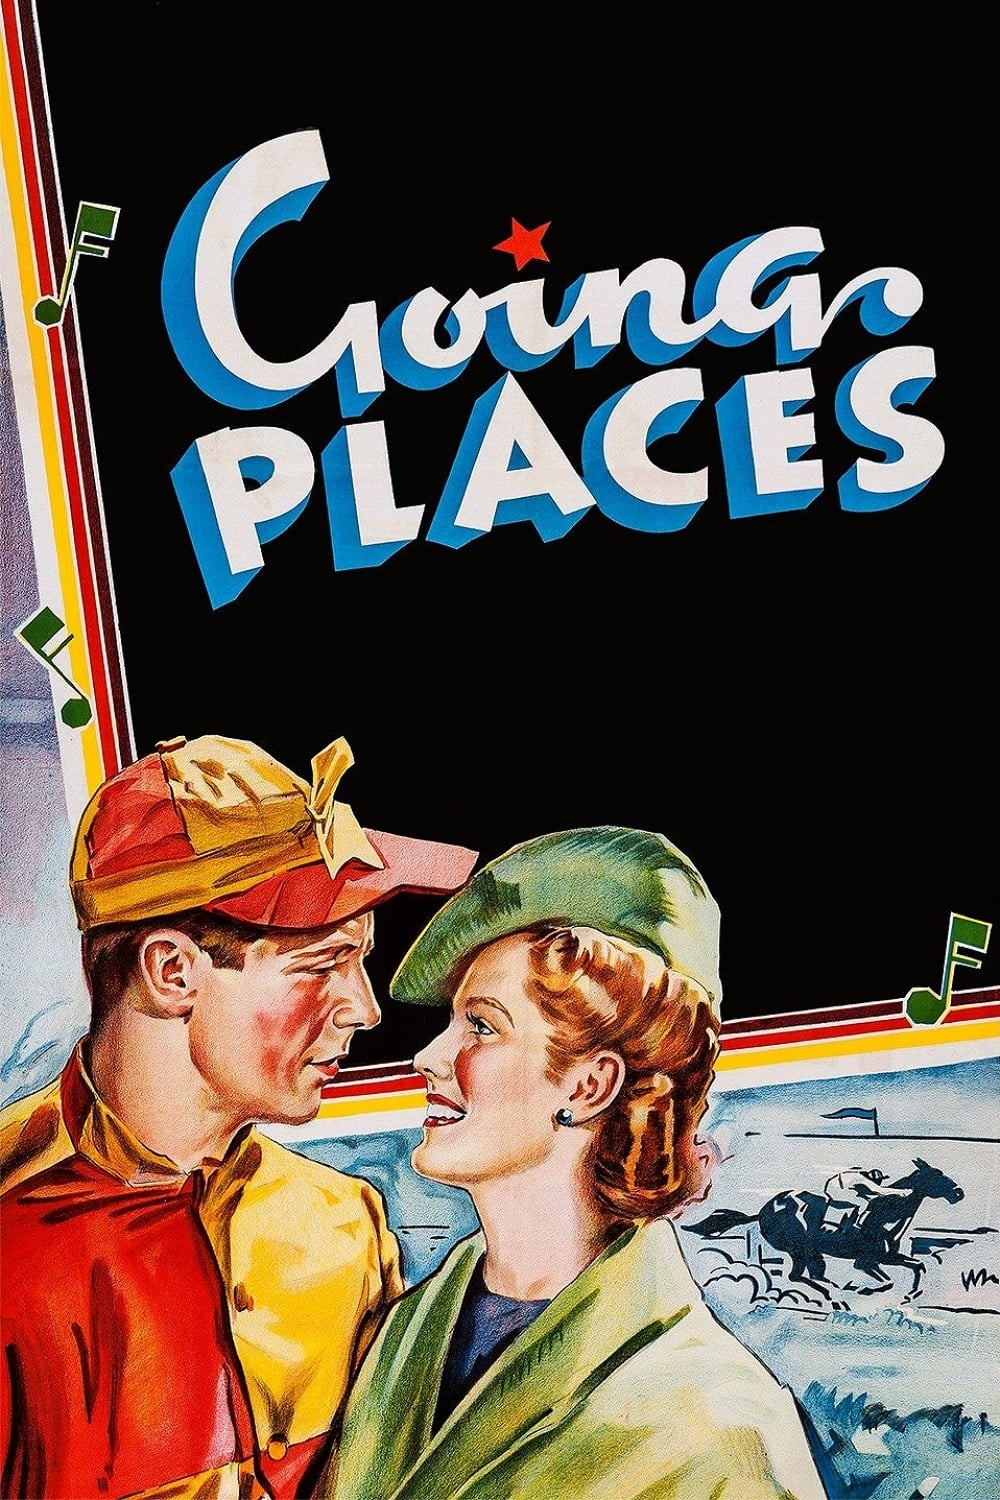 Going Places (1938)